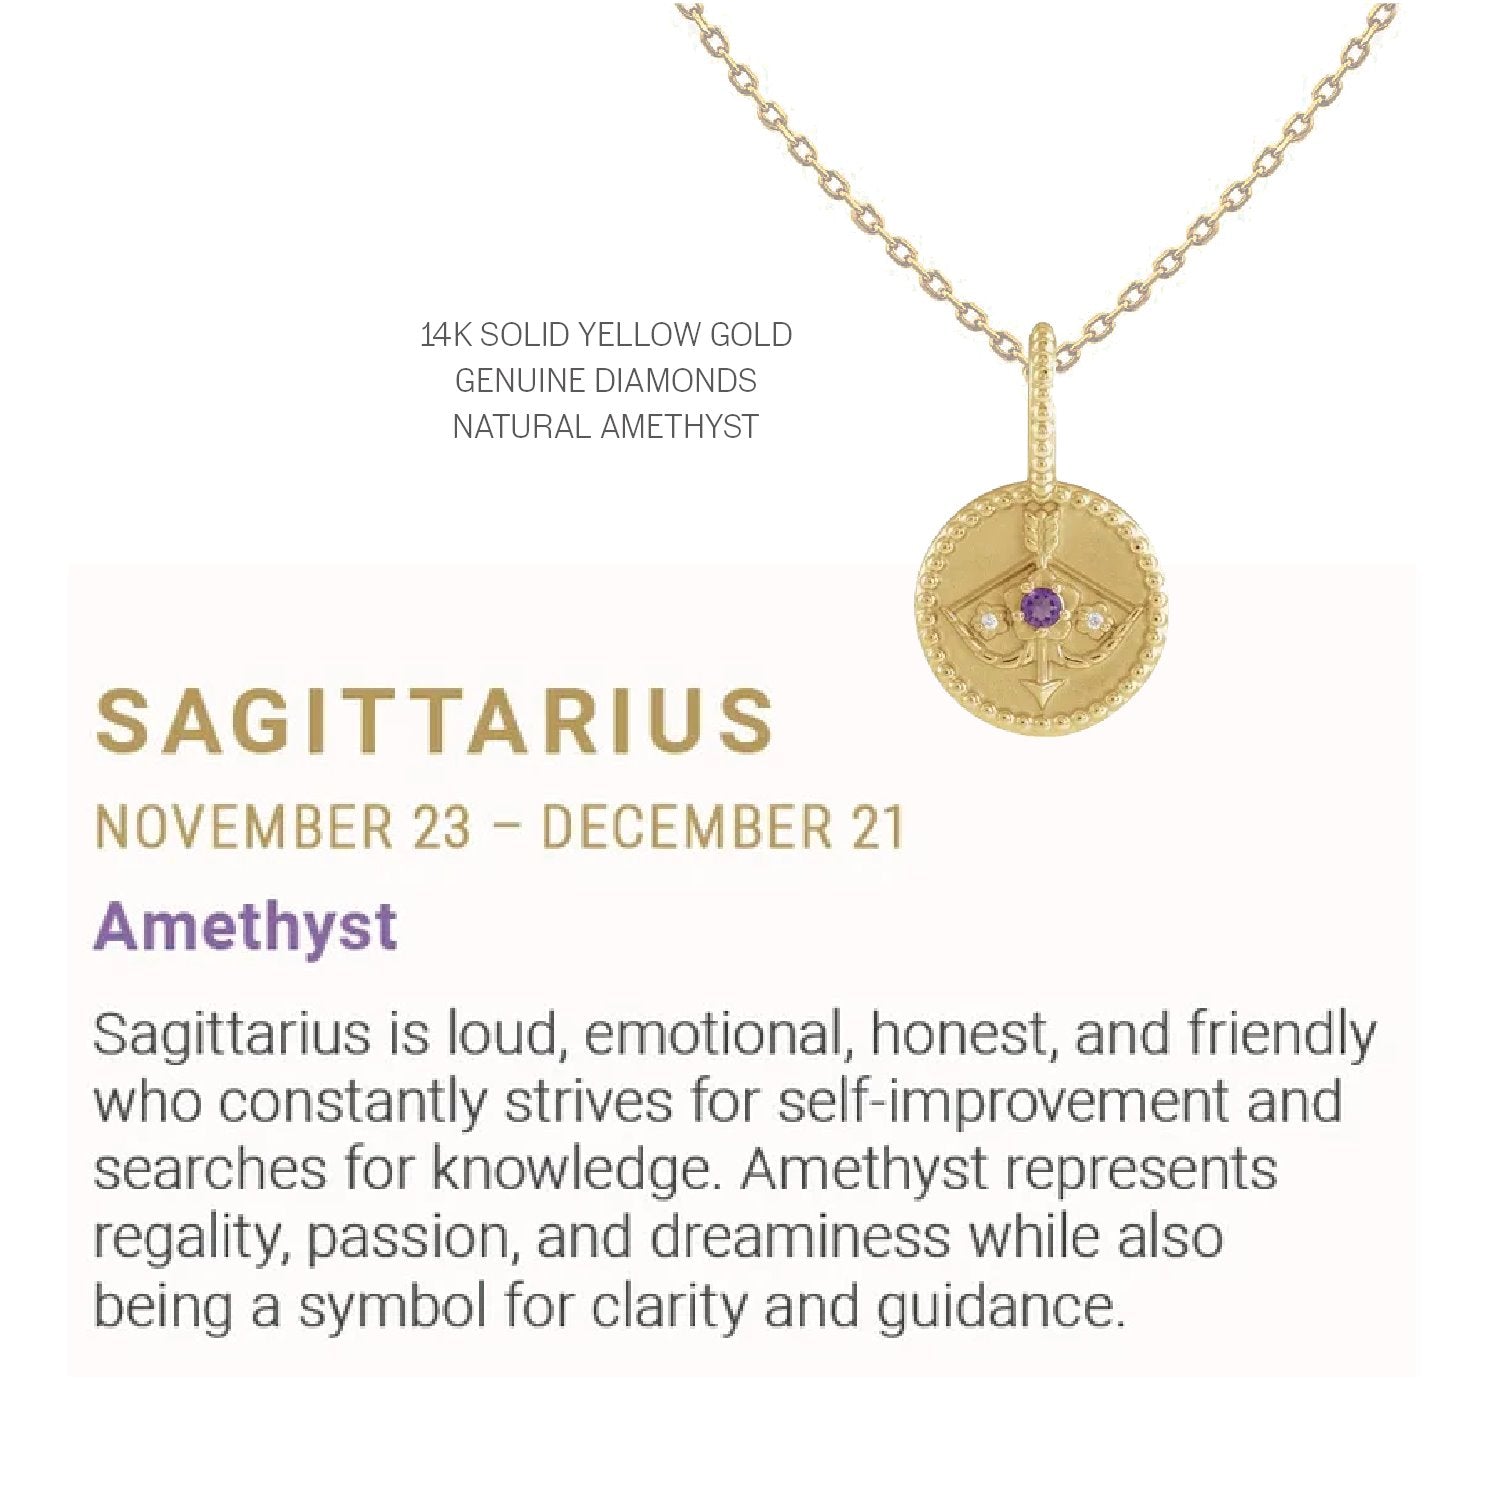 Zodiac Charm Necklace in 14K Gold with Diamonds Necklace Robyn Canady 14K Solid Gold 16" Sagittarius